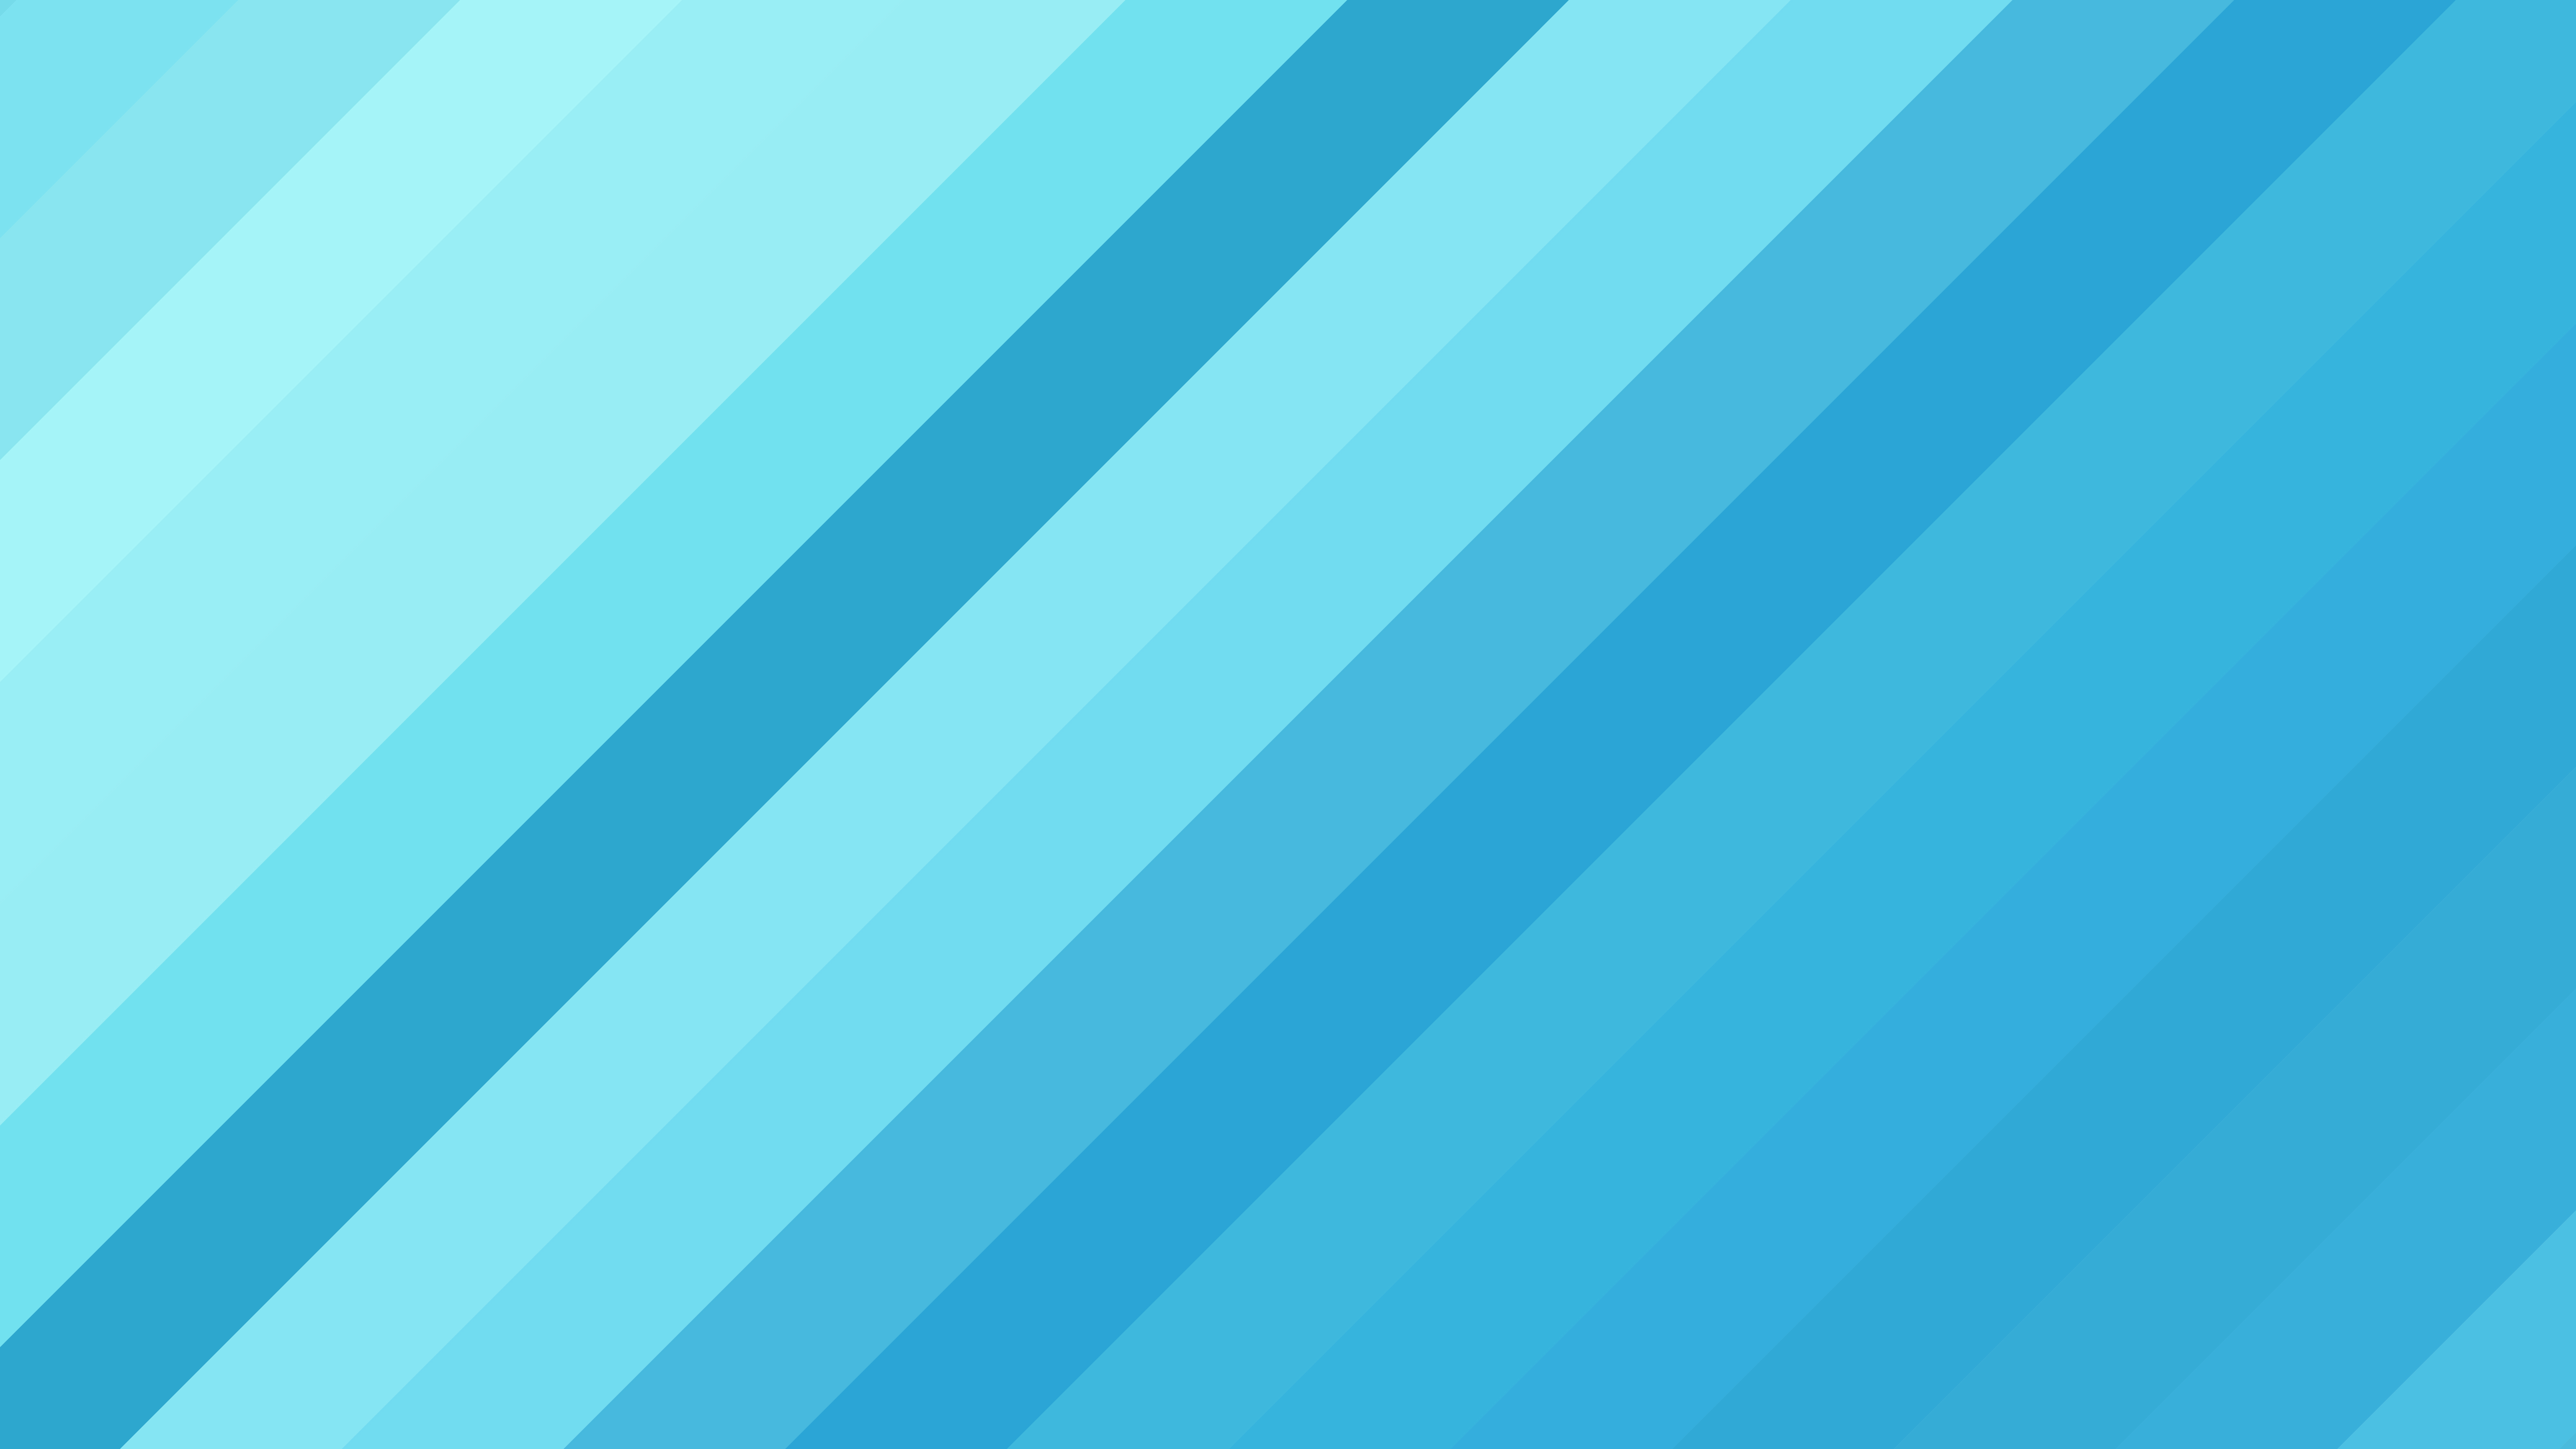 Blue Background With Diagonal Lines Design